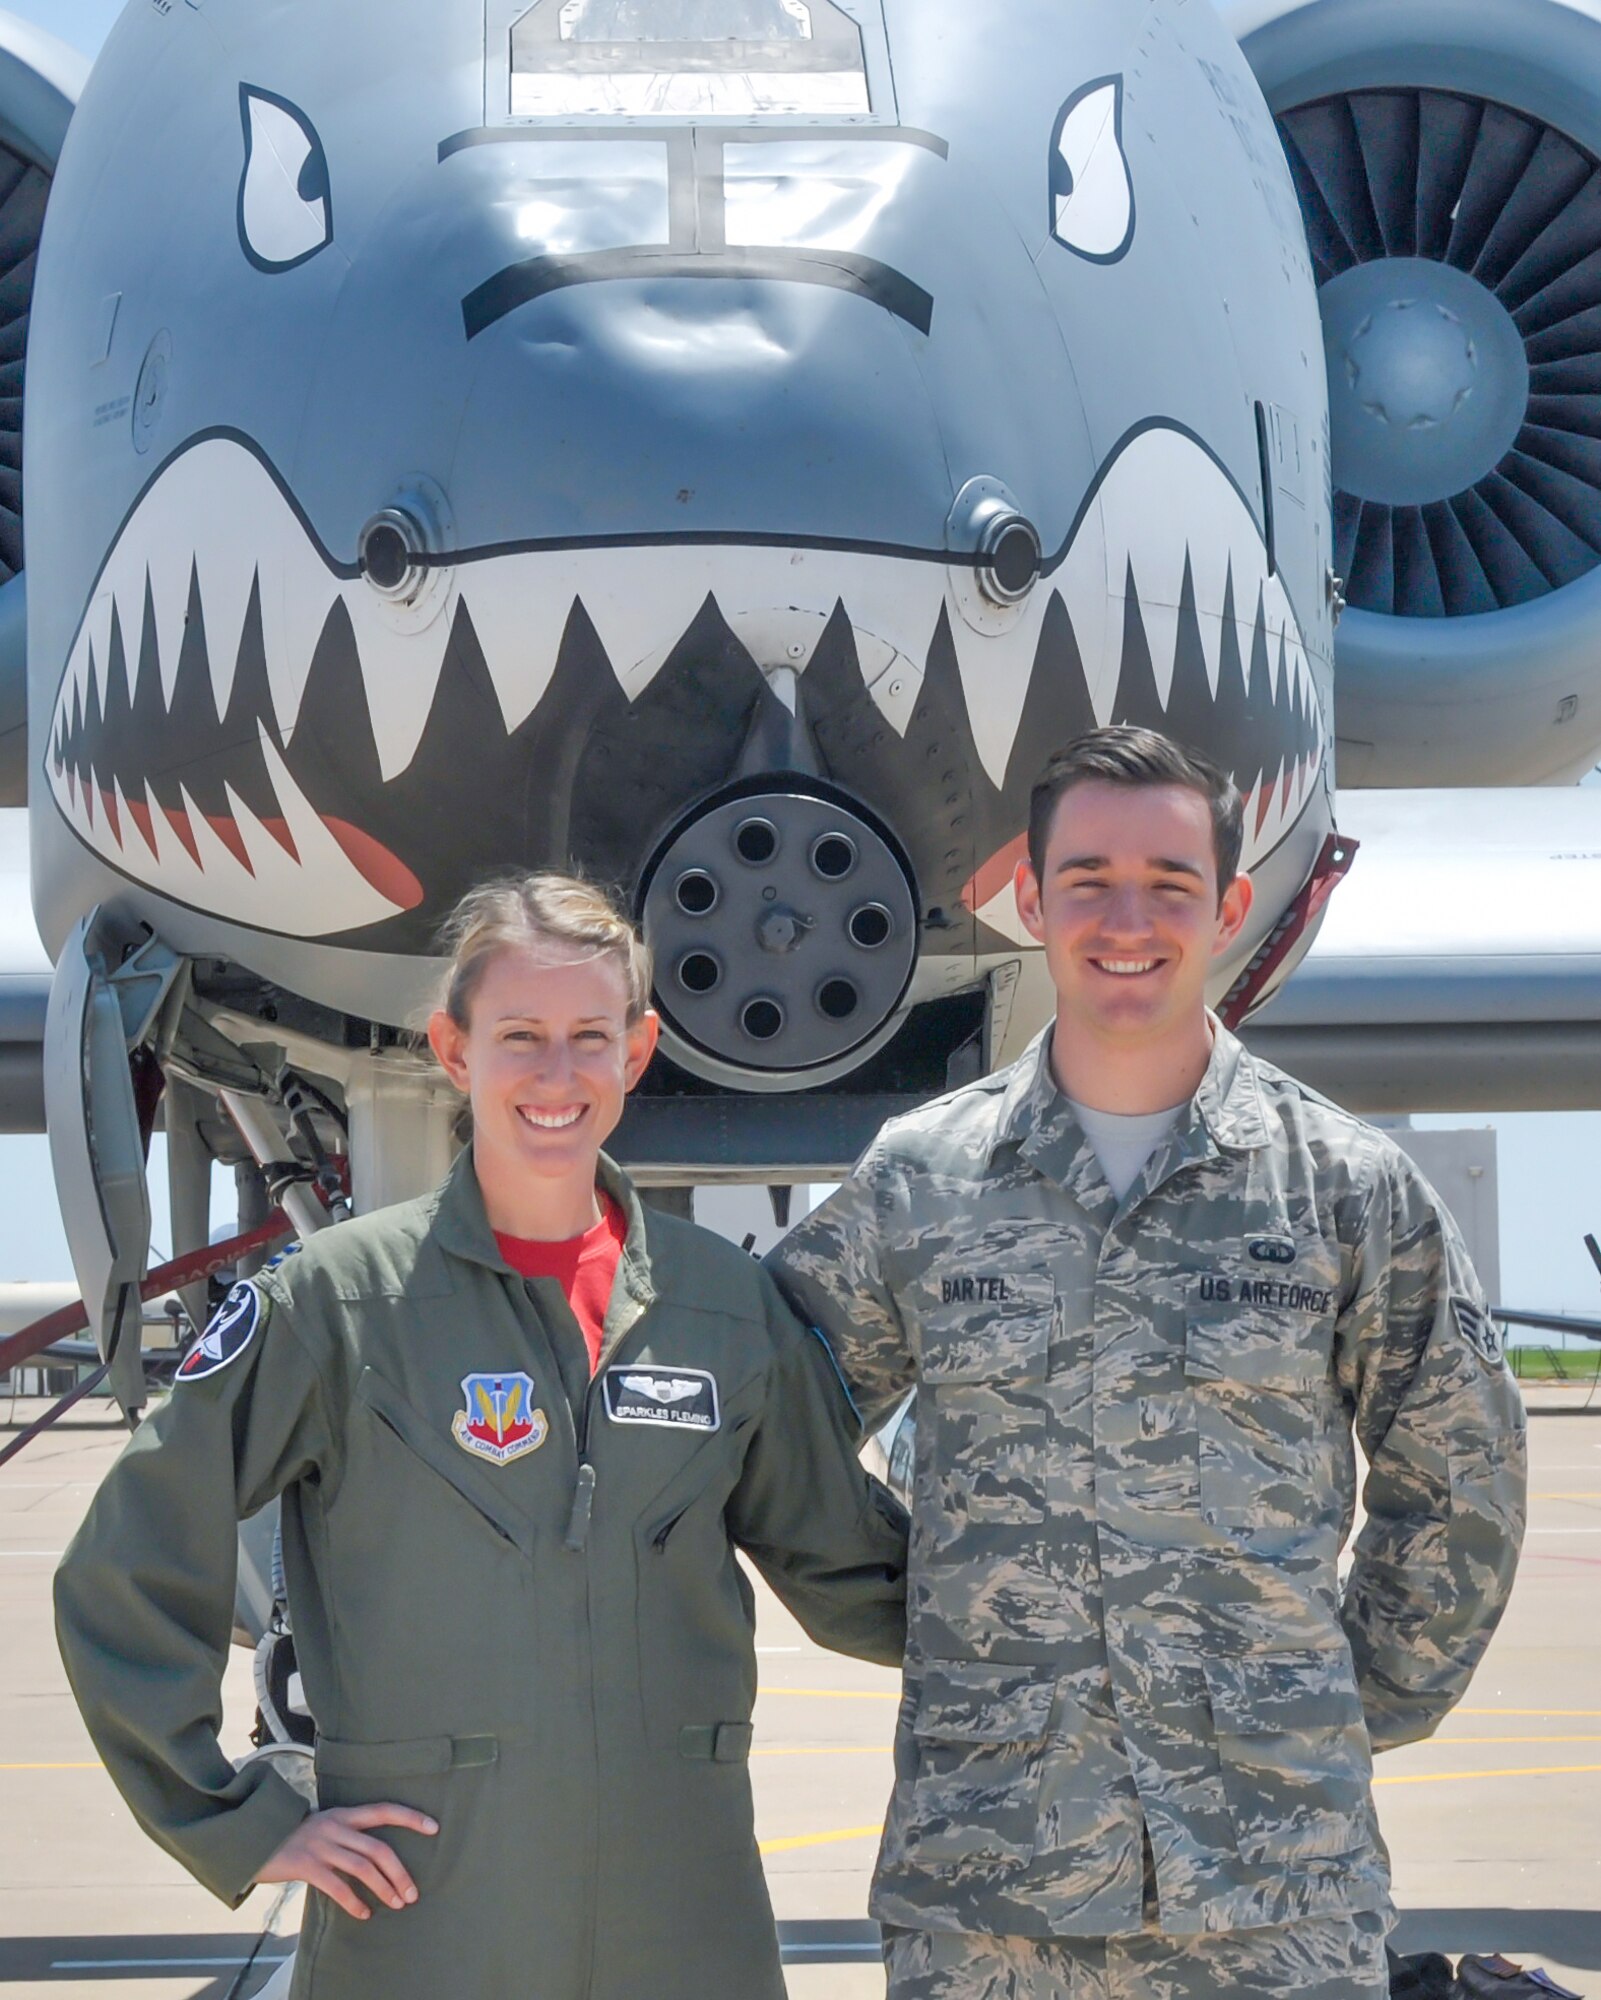 Capt. Chandra Fleming, a 75th Fighter Squadron A-10 Thunderbolt II pilot flying out of Moody Air Force Base, Georgia, and her brother, Senior Airman Michael Bartel, a 71st Operation Support Squadron air traffic controller, share a moment in front of Fleming’s A-10 at Vance Air Force Base, Oklahoma, May 1. The previous afternoon, Bartel, a 71st Operations Support Squadron air traffic controller stationed at Vance, directed his sister into local airspace and gave her approach clearance. (U.S. Air Force photo / 2nd Lt. Isabel Crump)